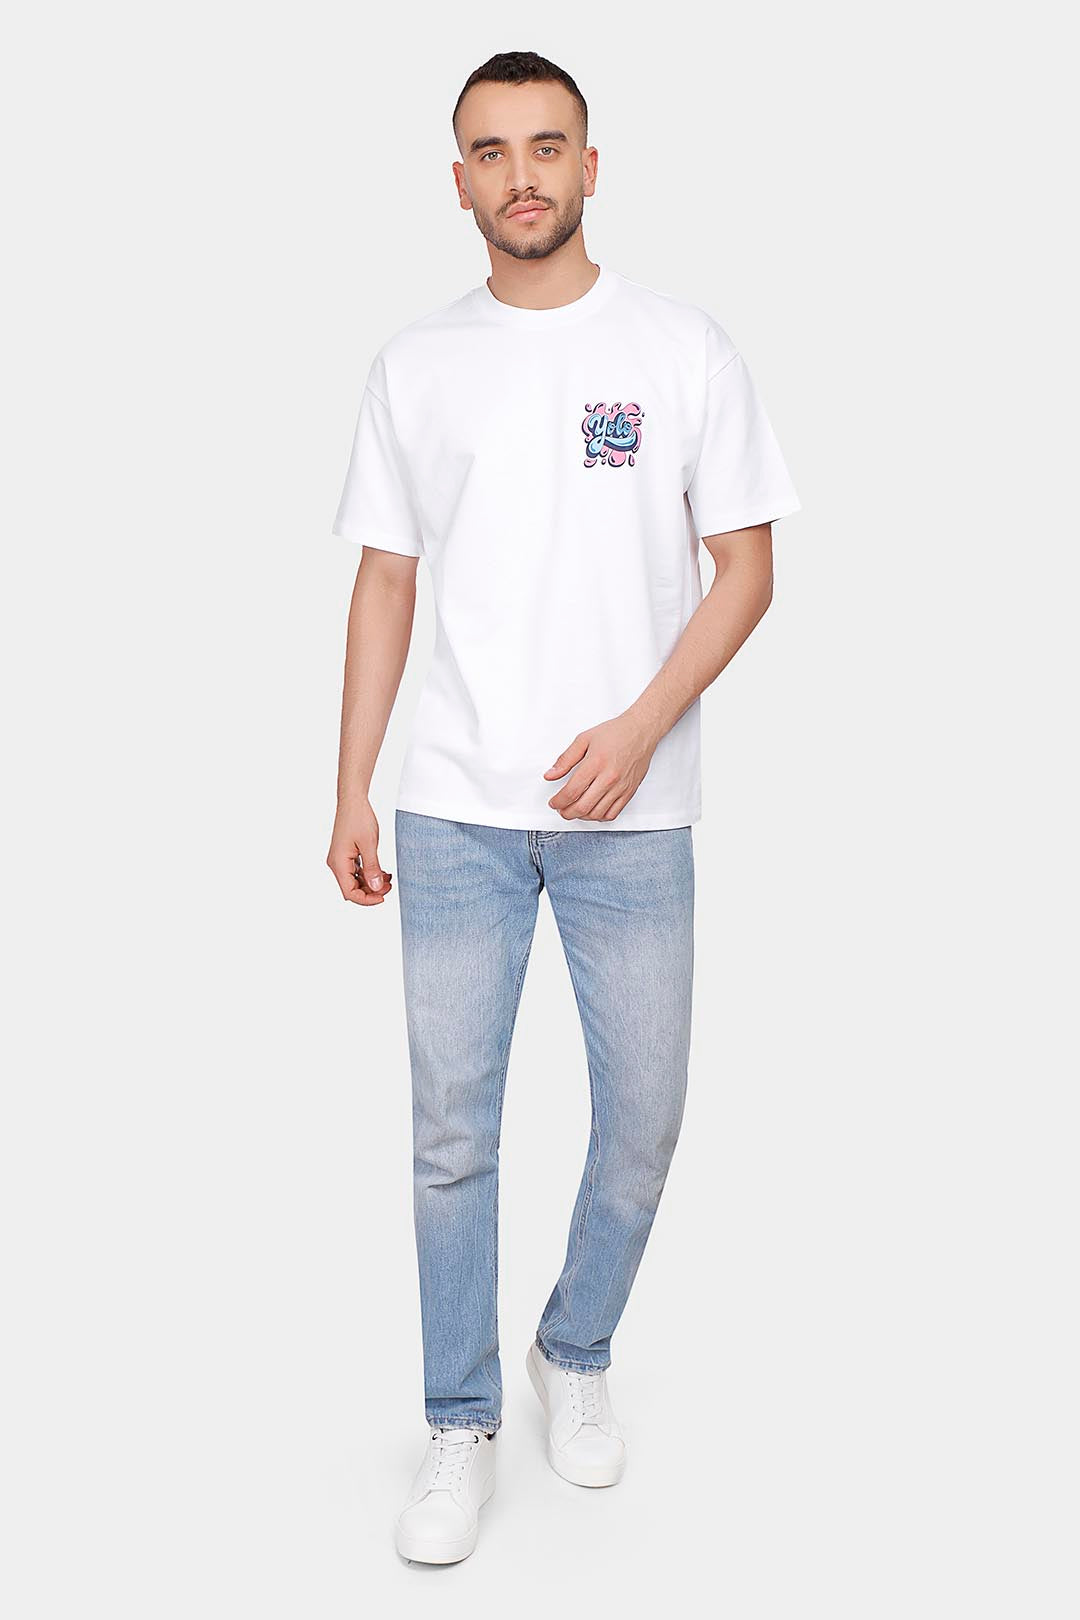 Off-White Printed Crew Neck Over Size T-Shirt